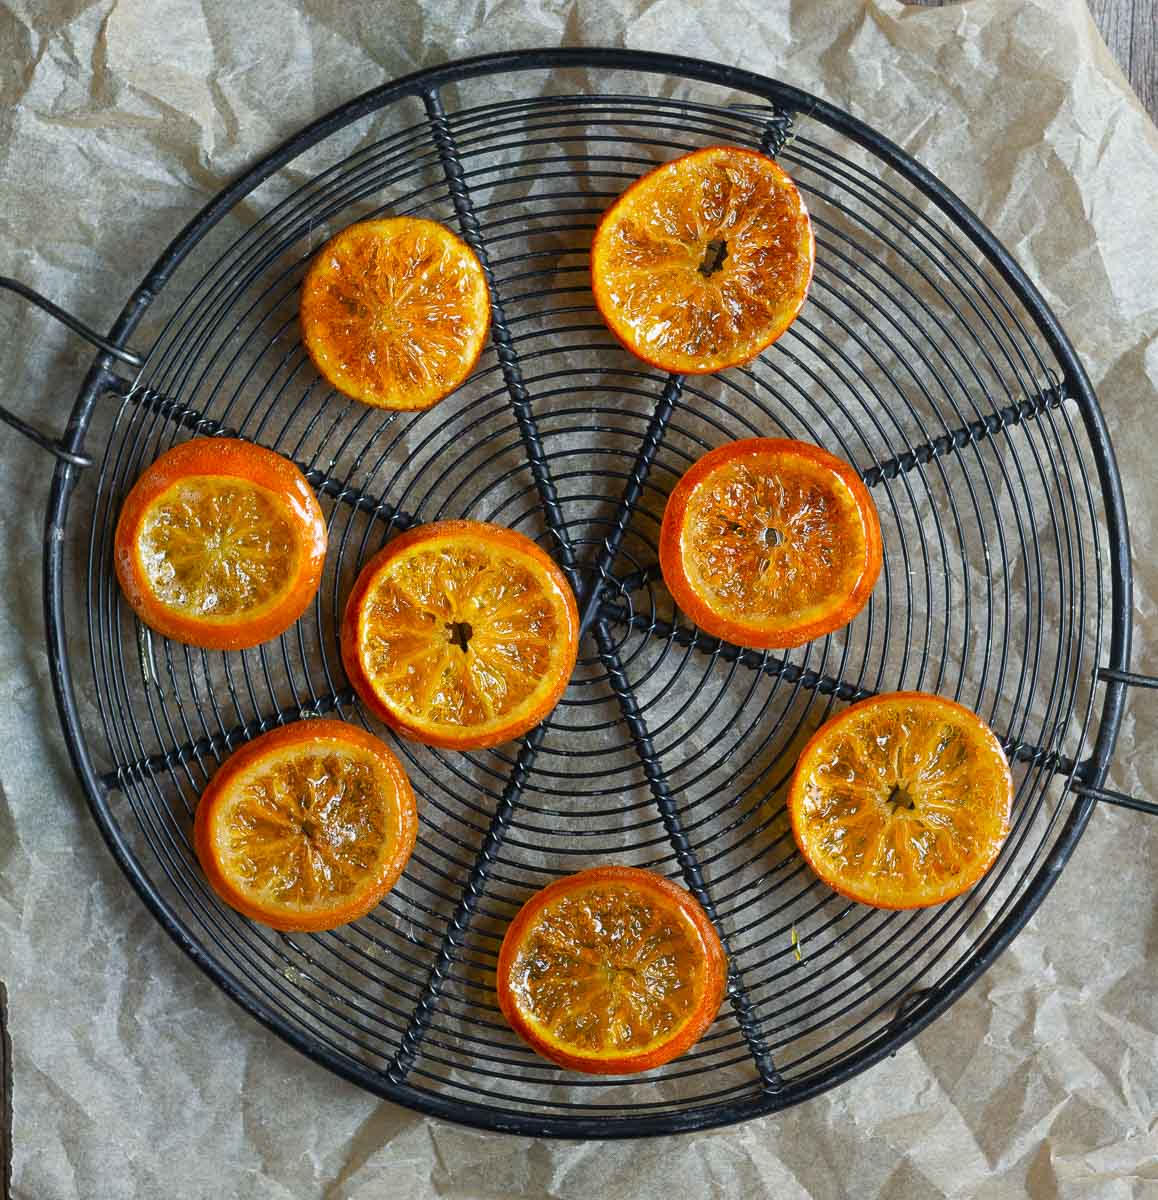 Transfer the orange slices to a cooling rack